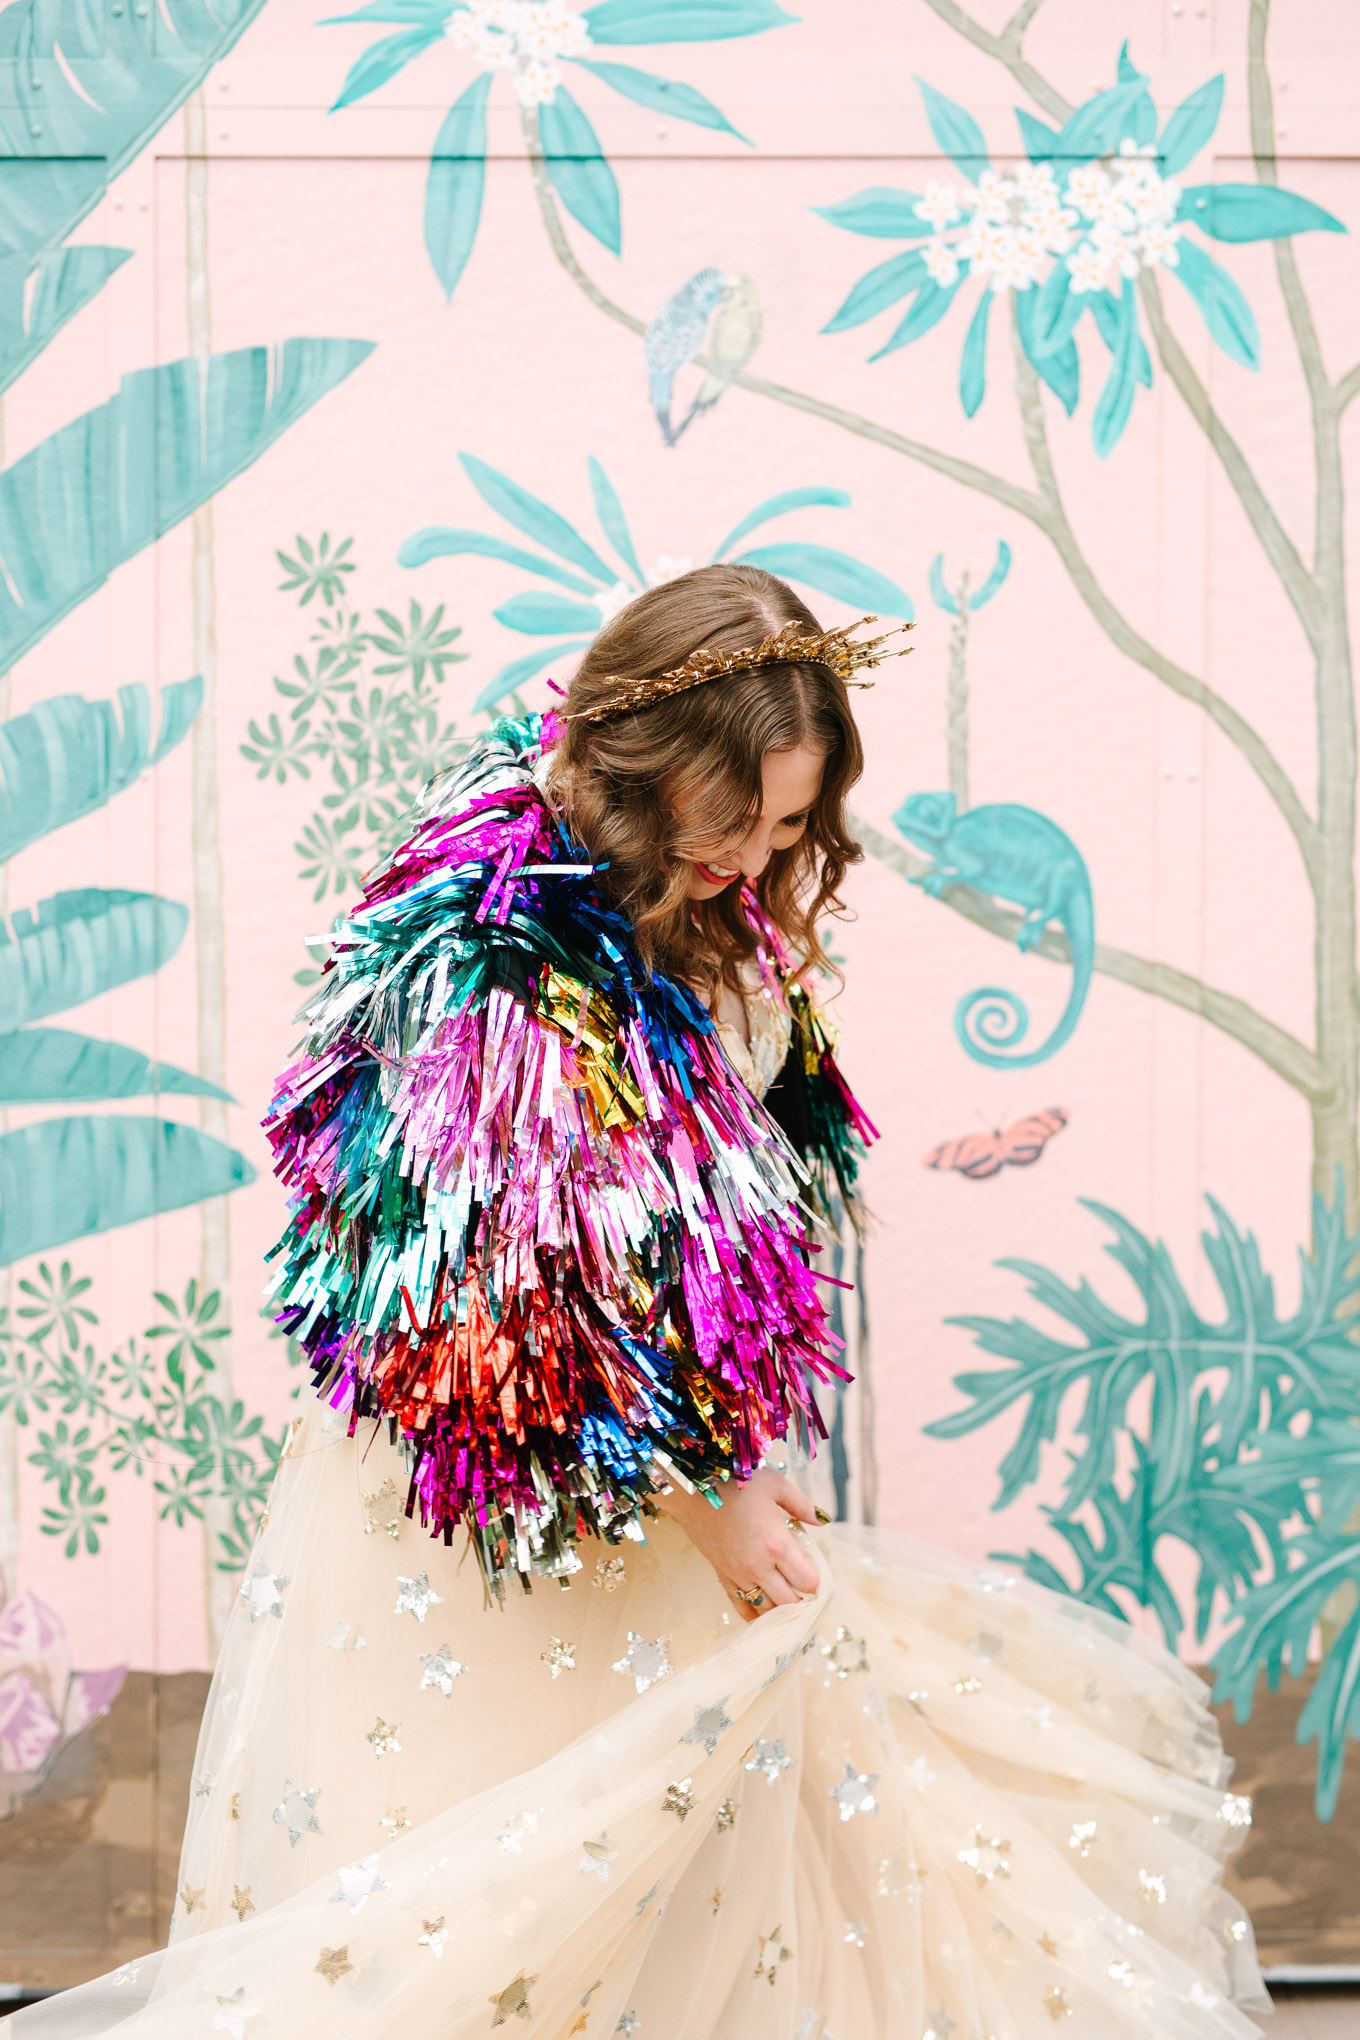 Bride wearing tinsel jacket by Rachel Burke | Colorful Downtown Los Angeles Valentine Wedding | Los Angeles wedding photographer | #losangeleswedding #colorfulwedding #DTLA #valentinedtla   Source: Mary Costa Photography | Los Angeles